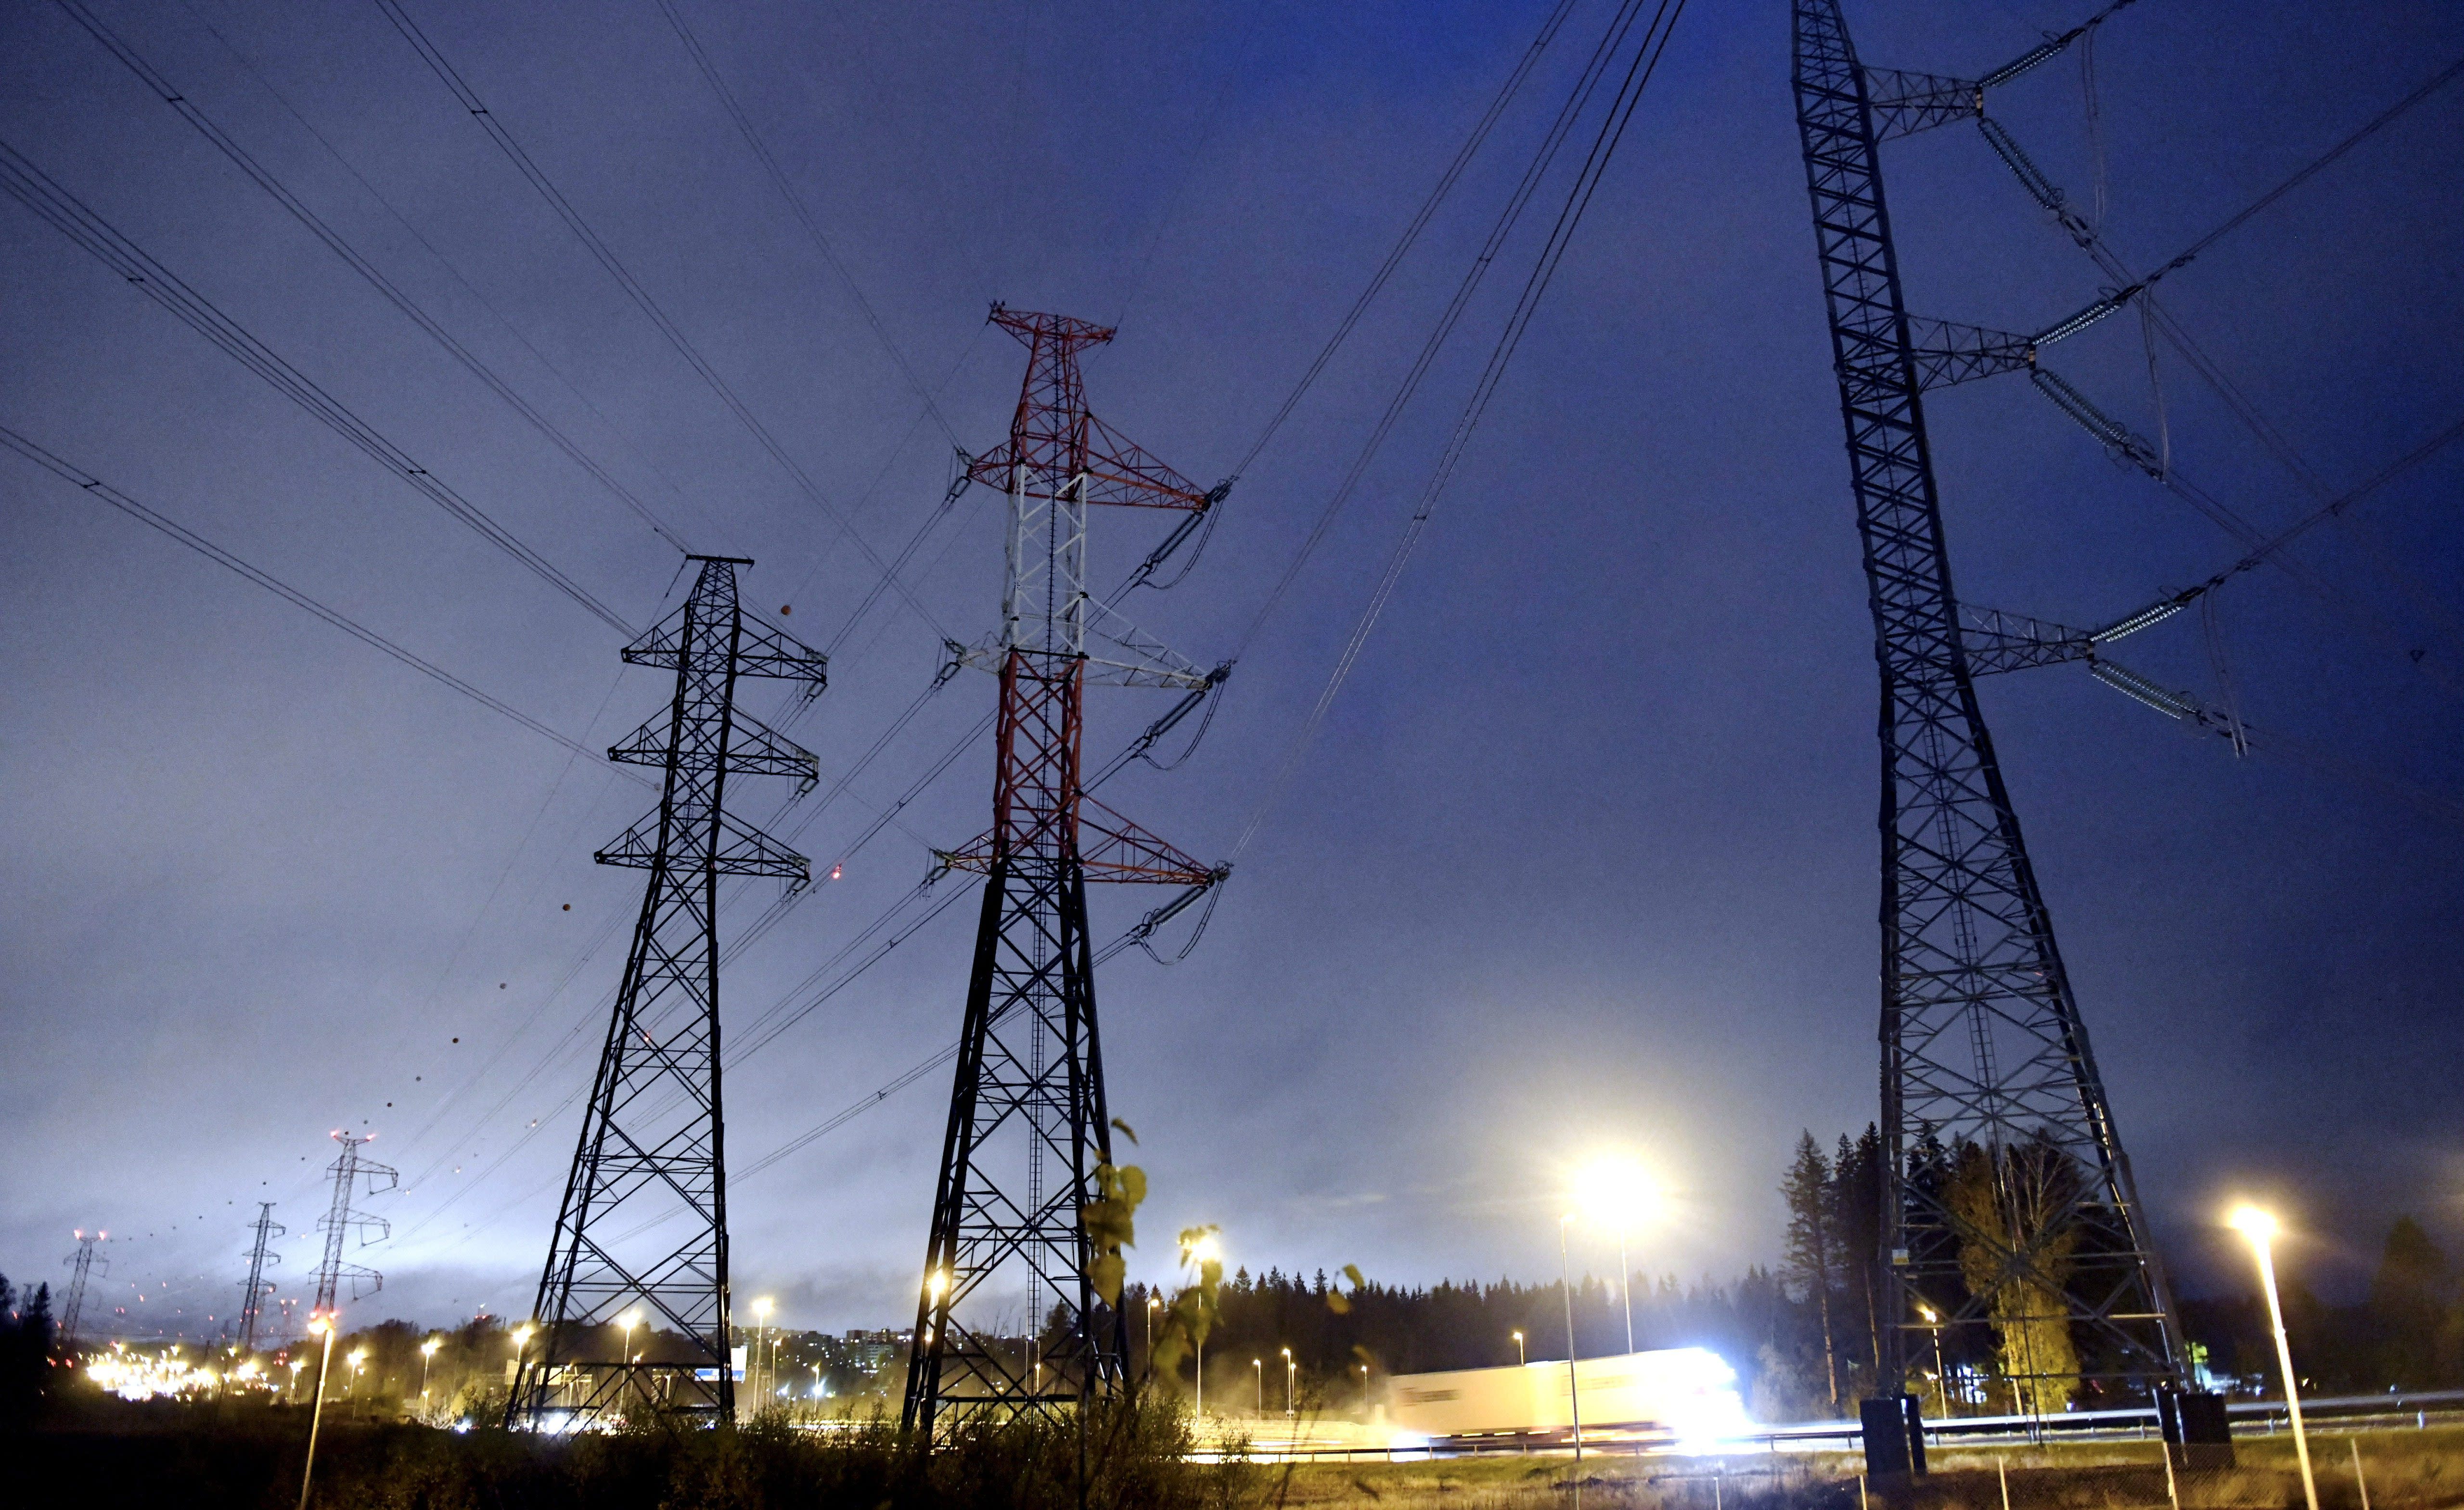 Finland limits its electricity transmission capacity from Russia